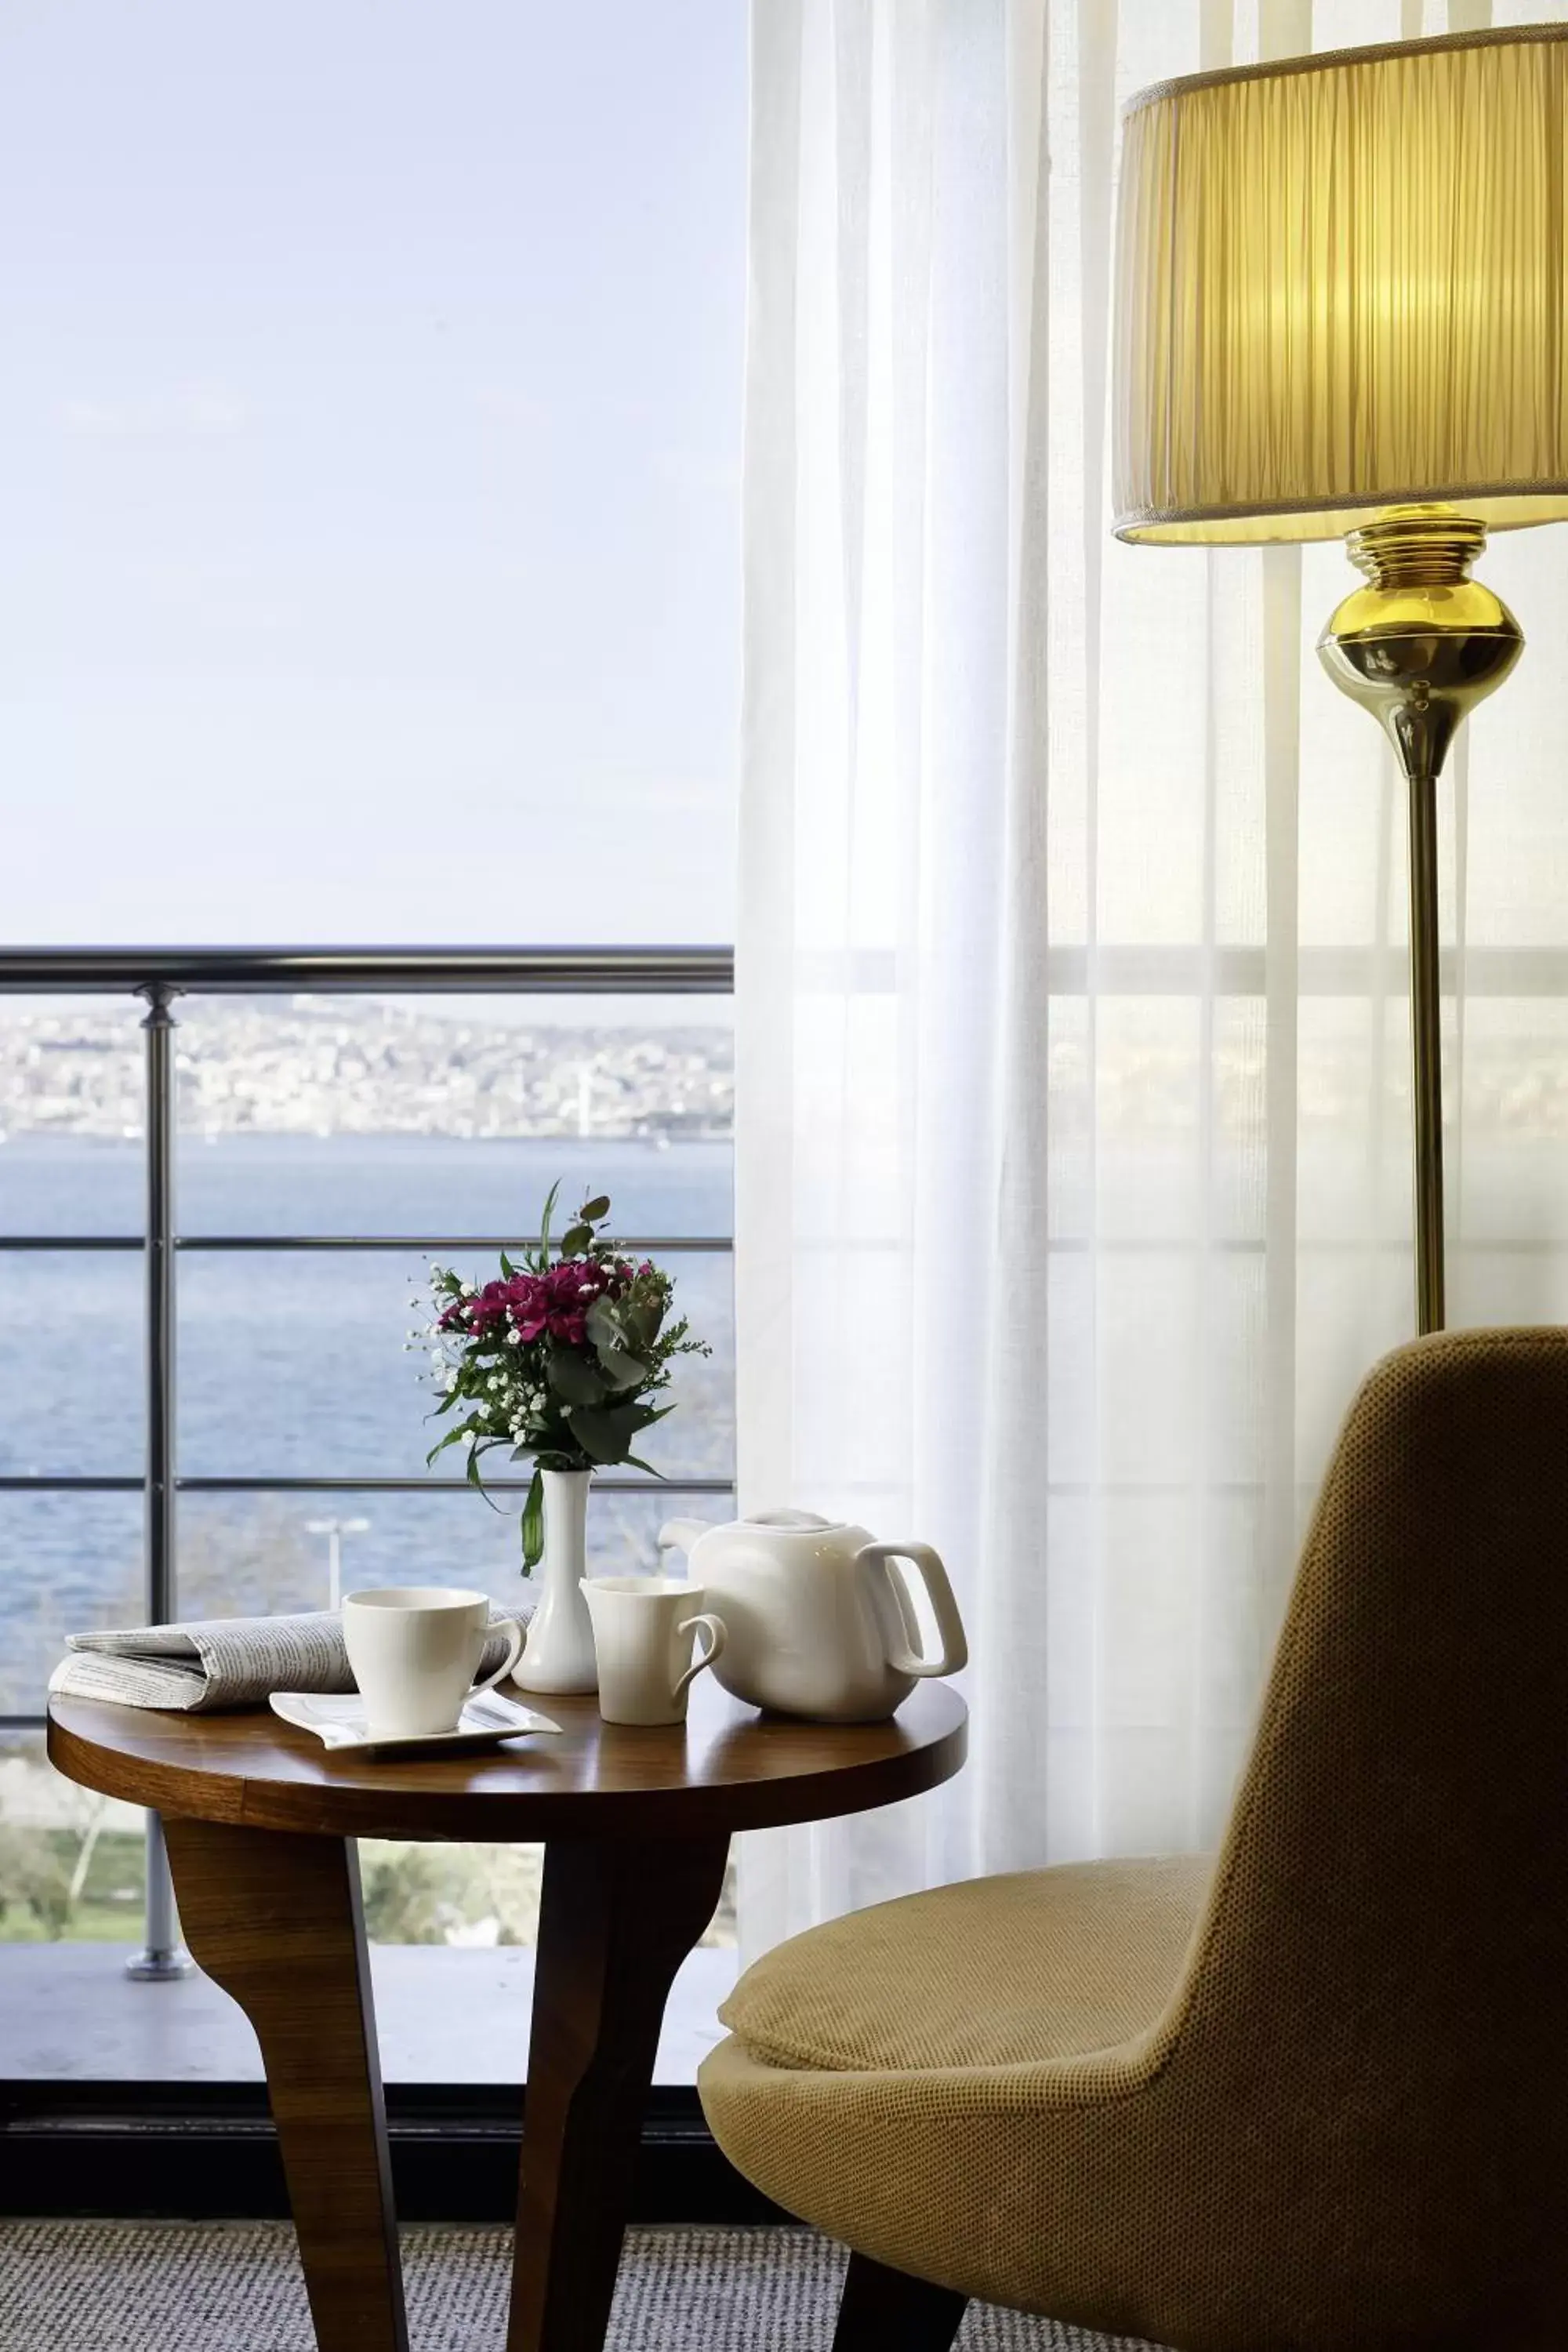 View (from property/room) in Zimmer Bosphorus Hotel